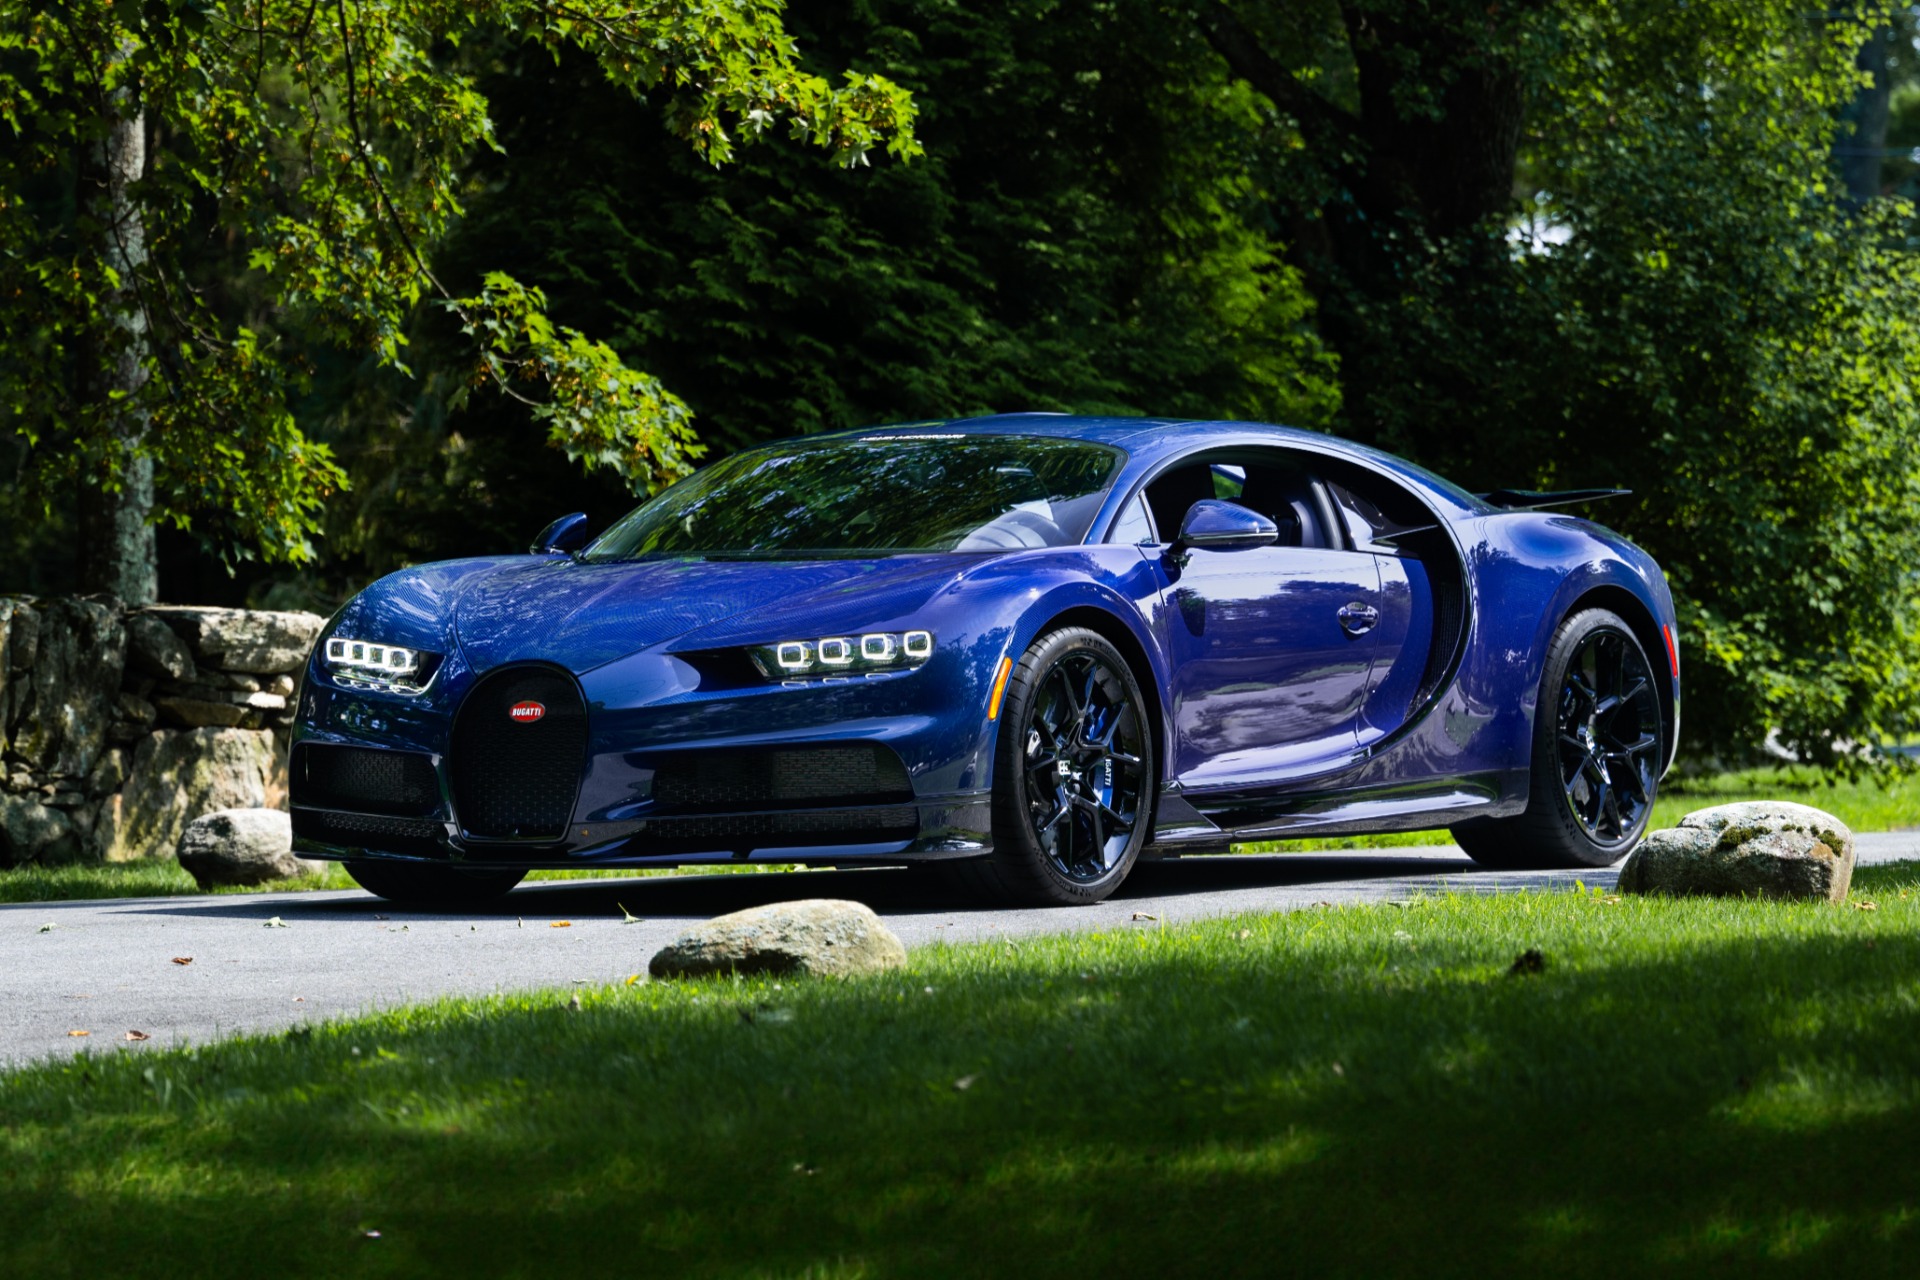 Used 2018 Bugatti Chiron Chiron for sale Sold at Alfa Romeo of Westport in Westport CT 06880 1